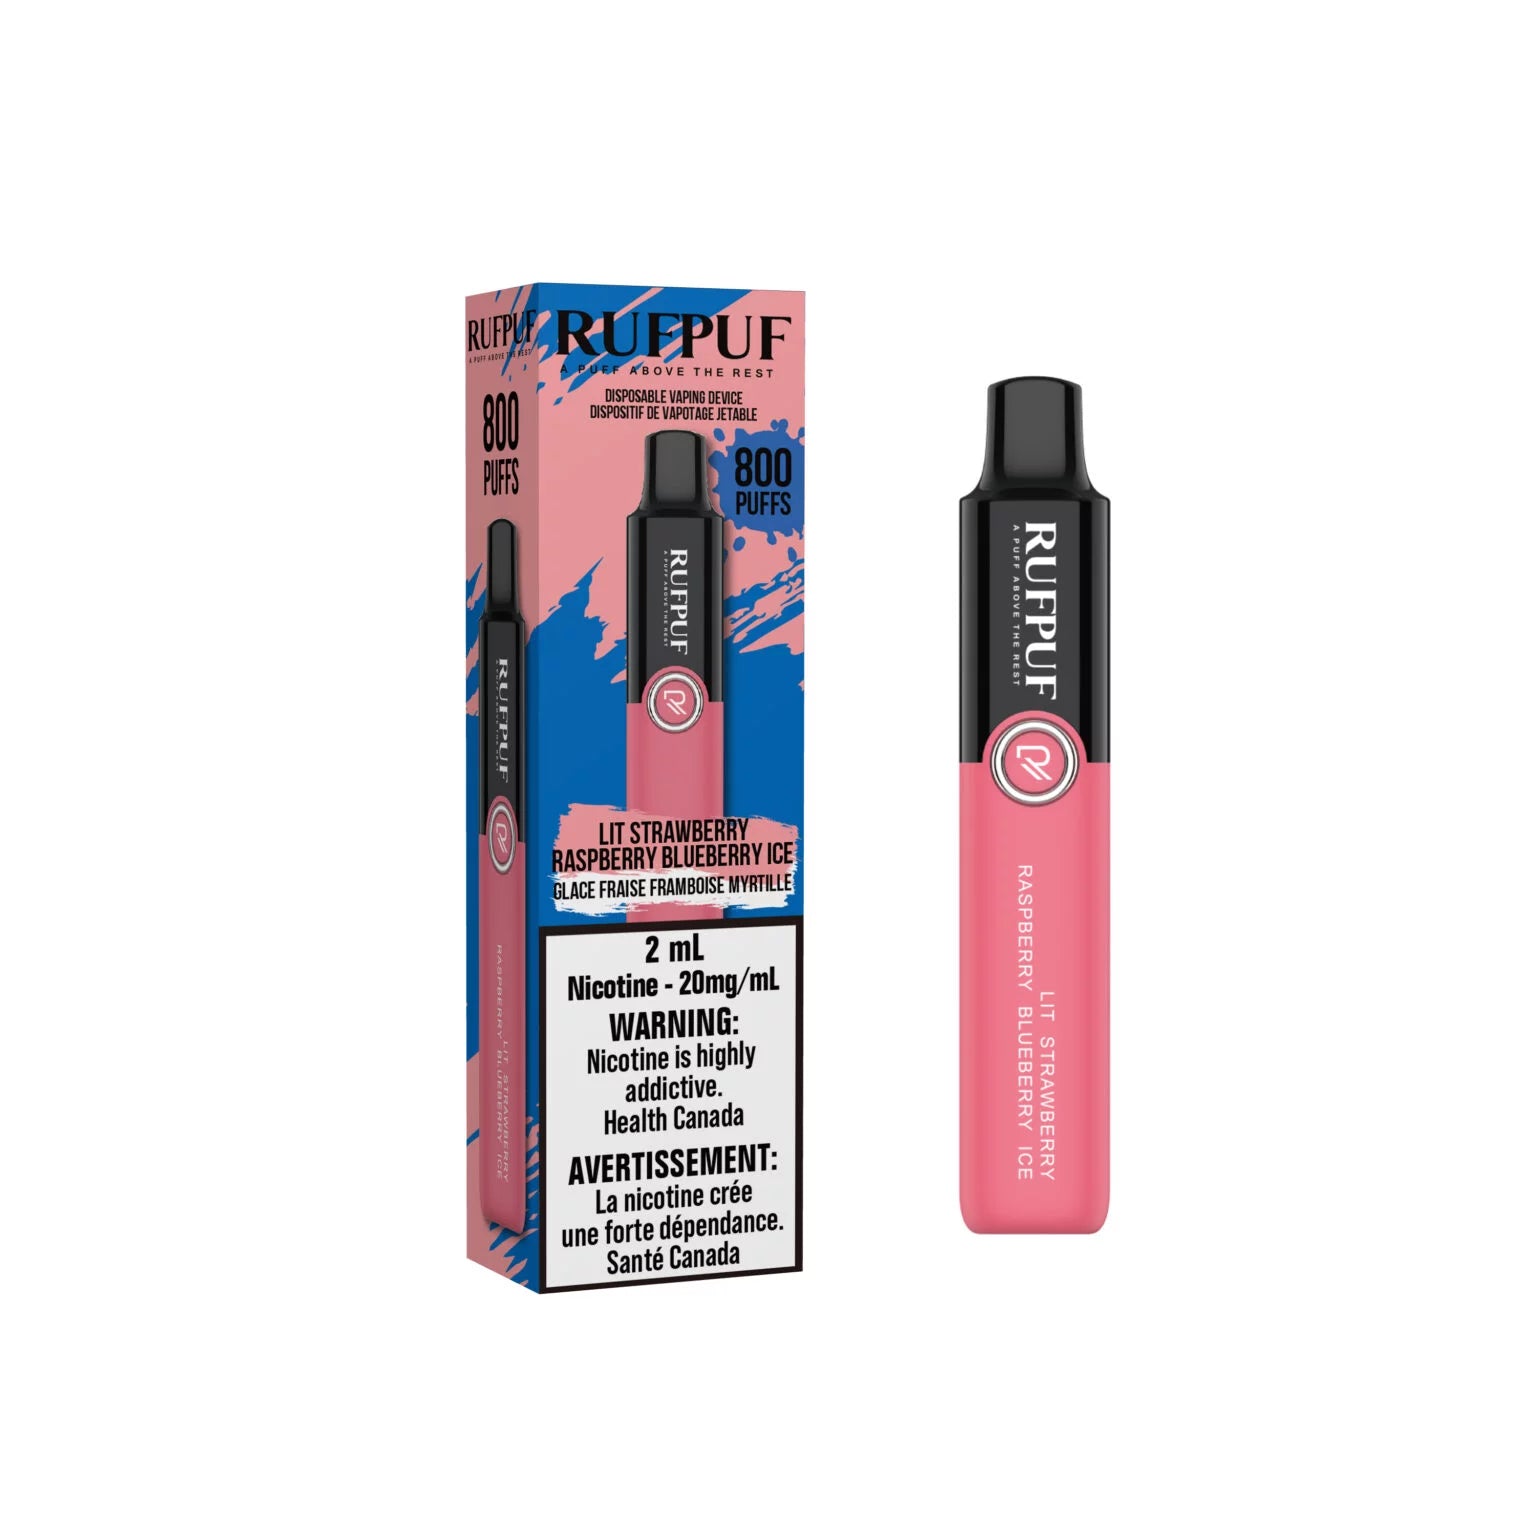 Rufpuf 800 puff disposable Lit Strawberry Raspberry Blueberry ice